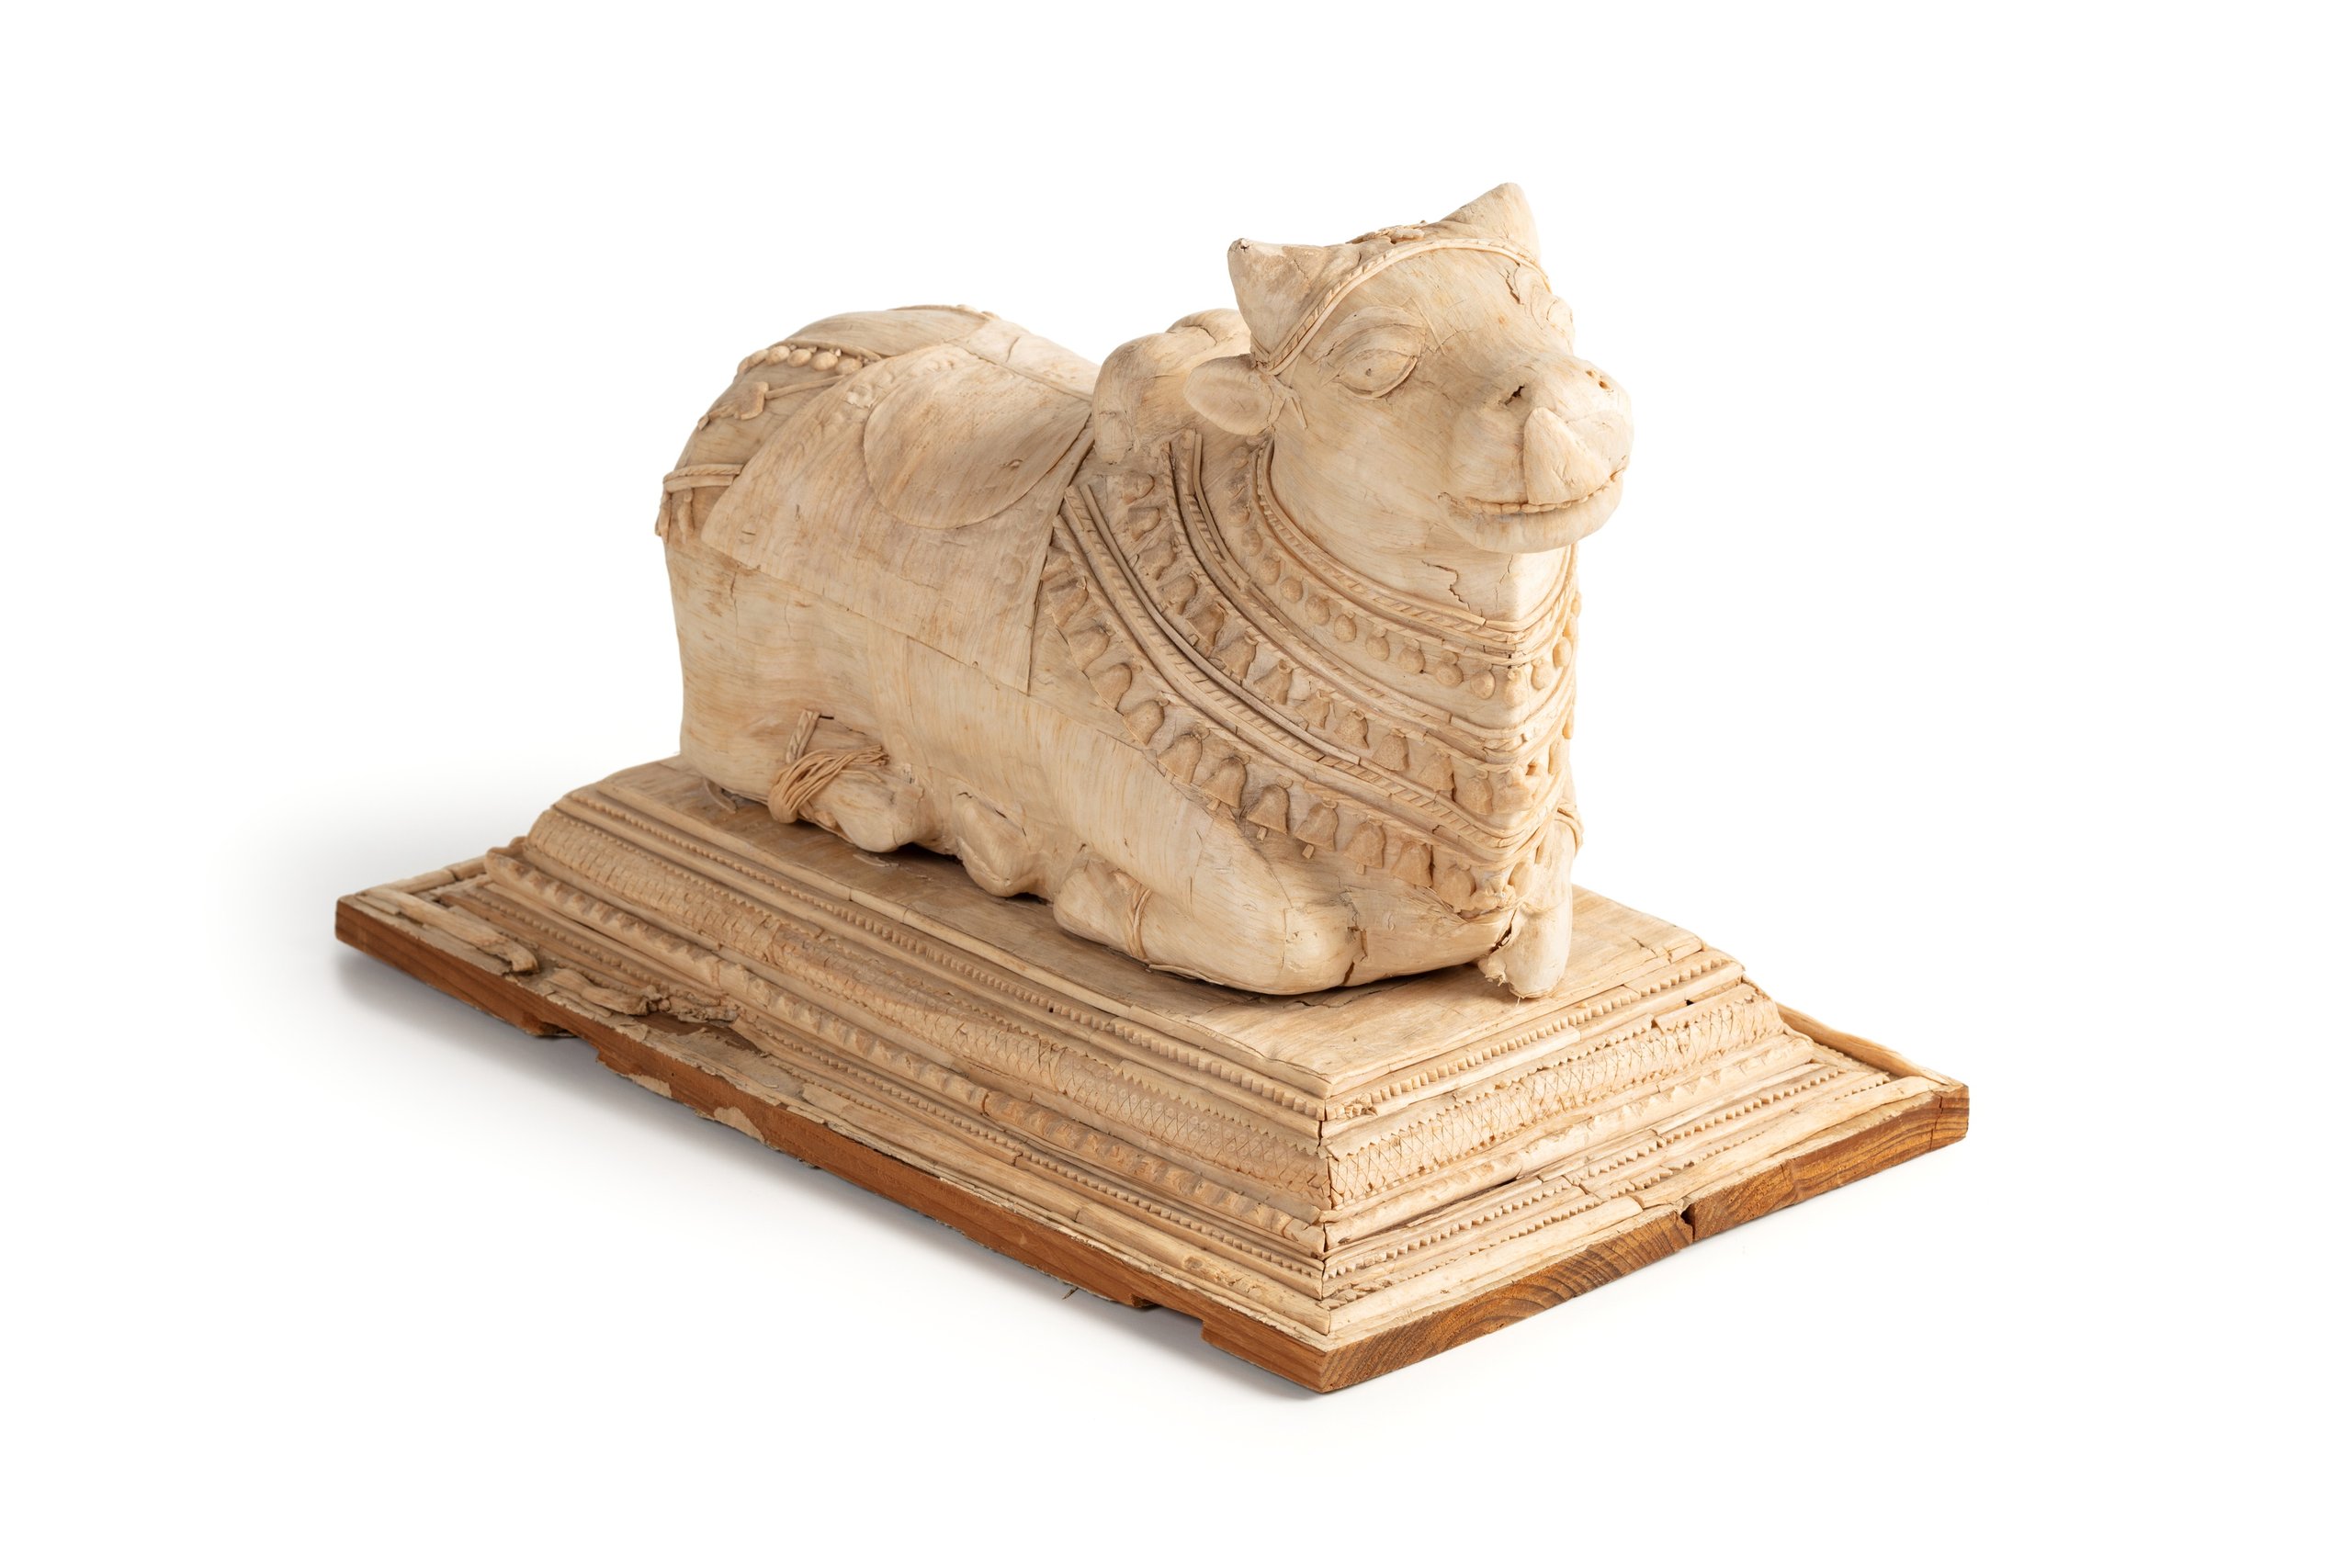 Model of a Brahmin bull made from the pith of Aeschynomene Sesban